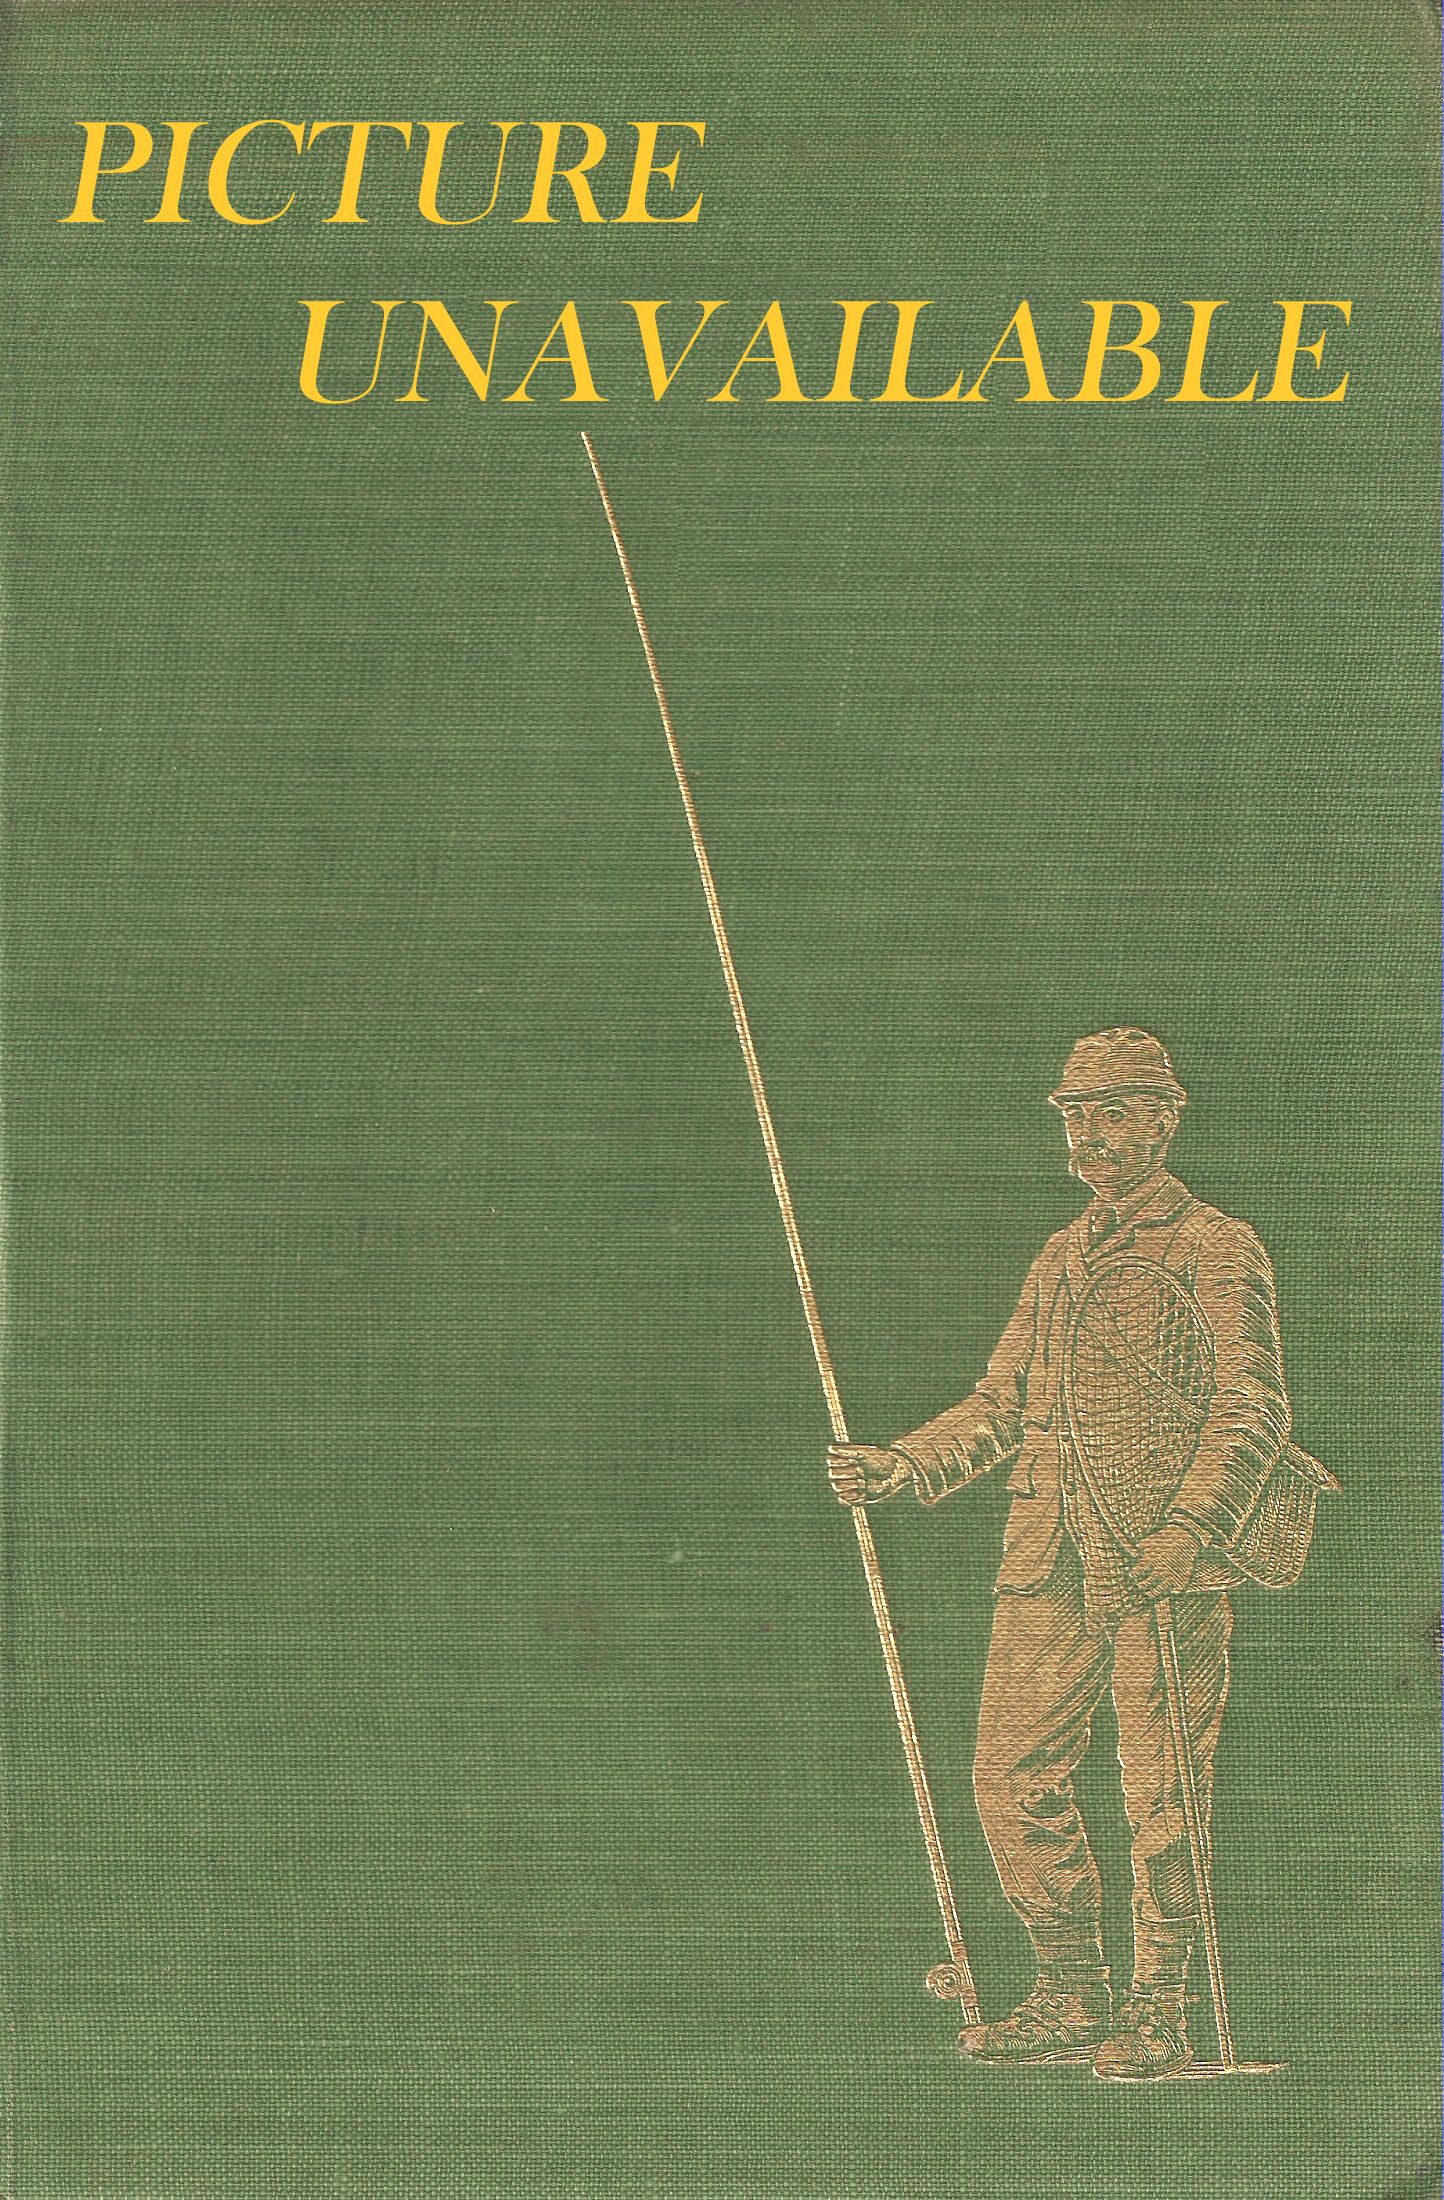 BY TWINKLING STREAMS: A BOOK FOR GAME-FISH ANGLERS. By G.W. Borlase.